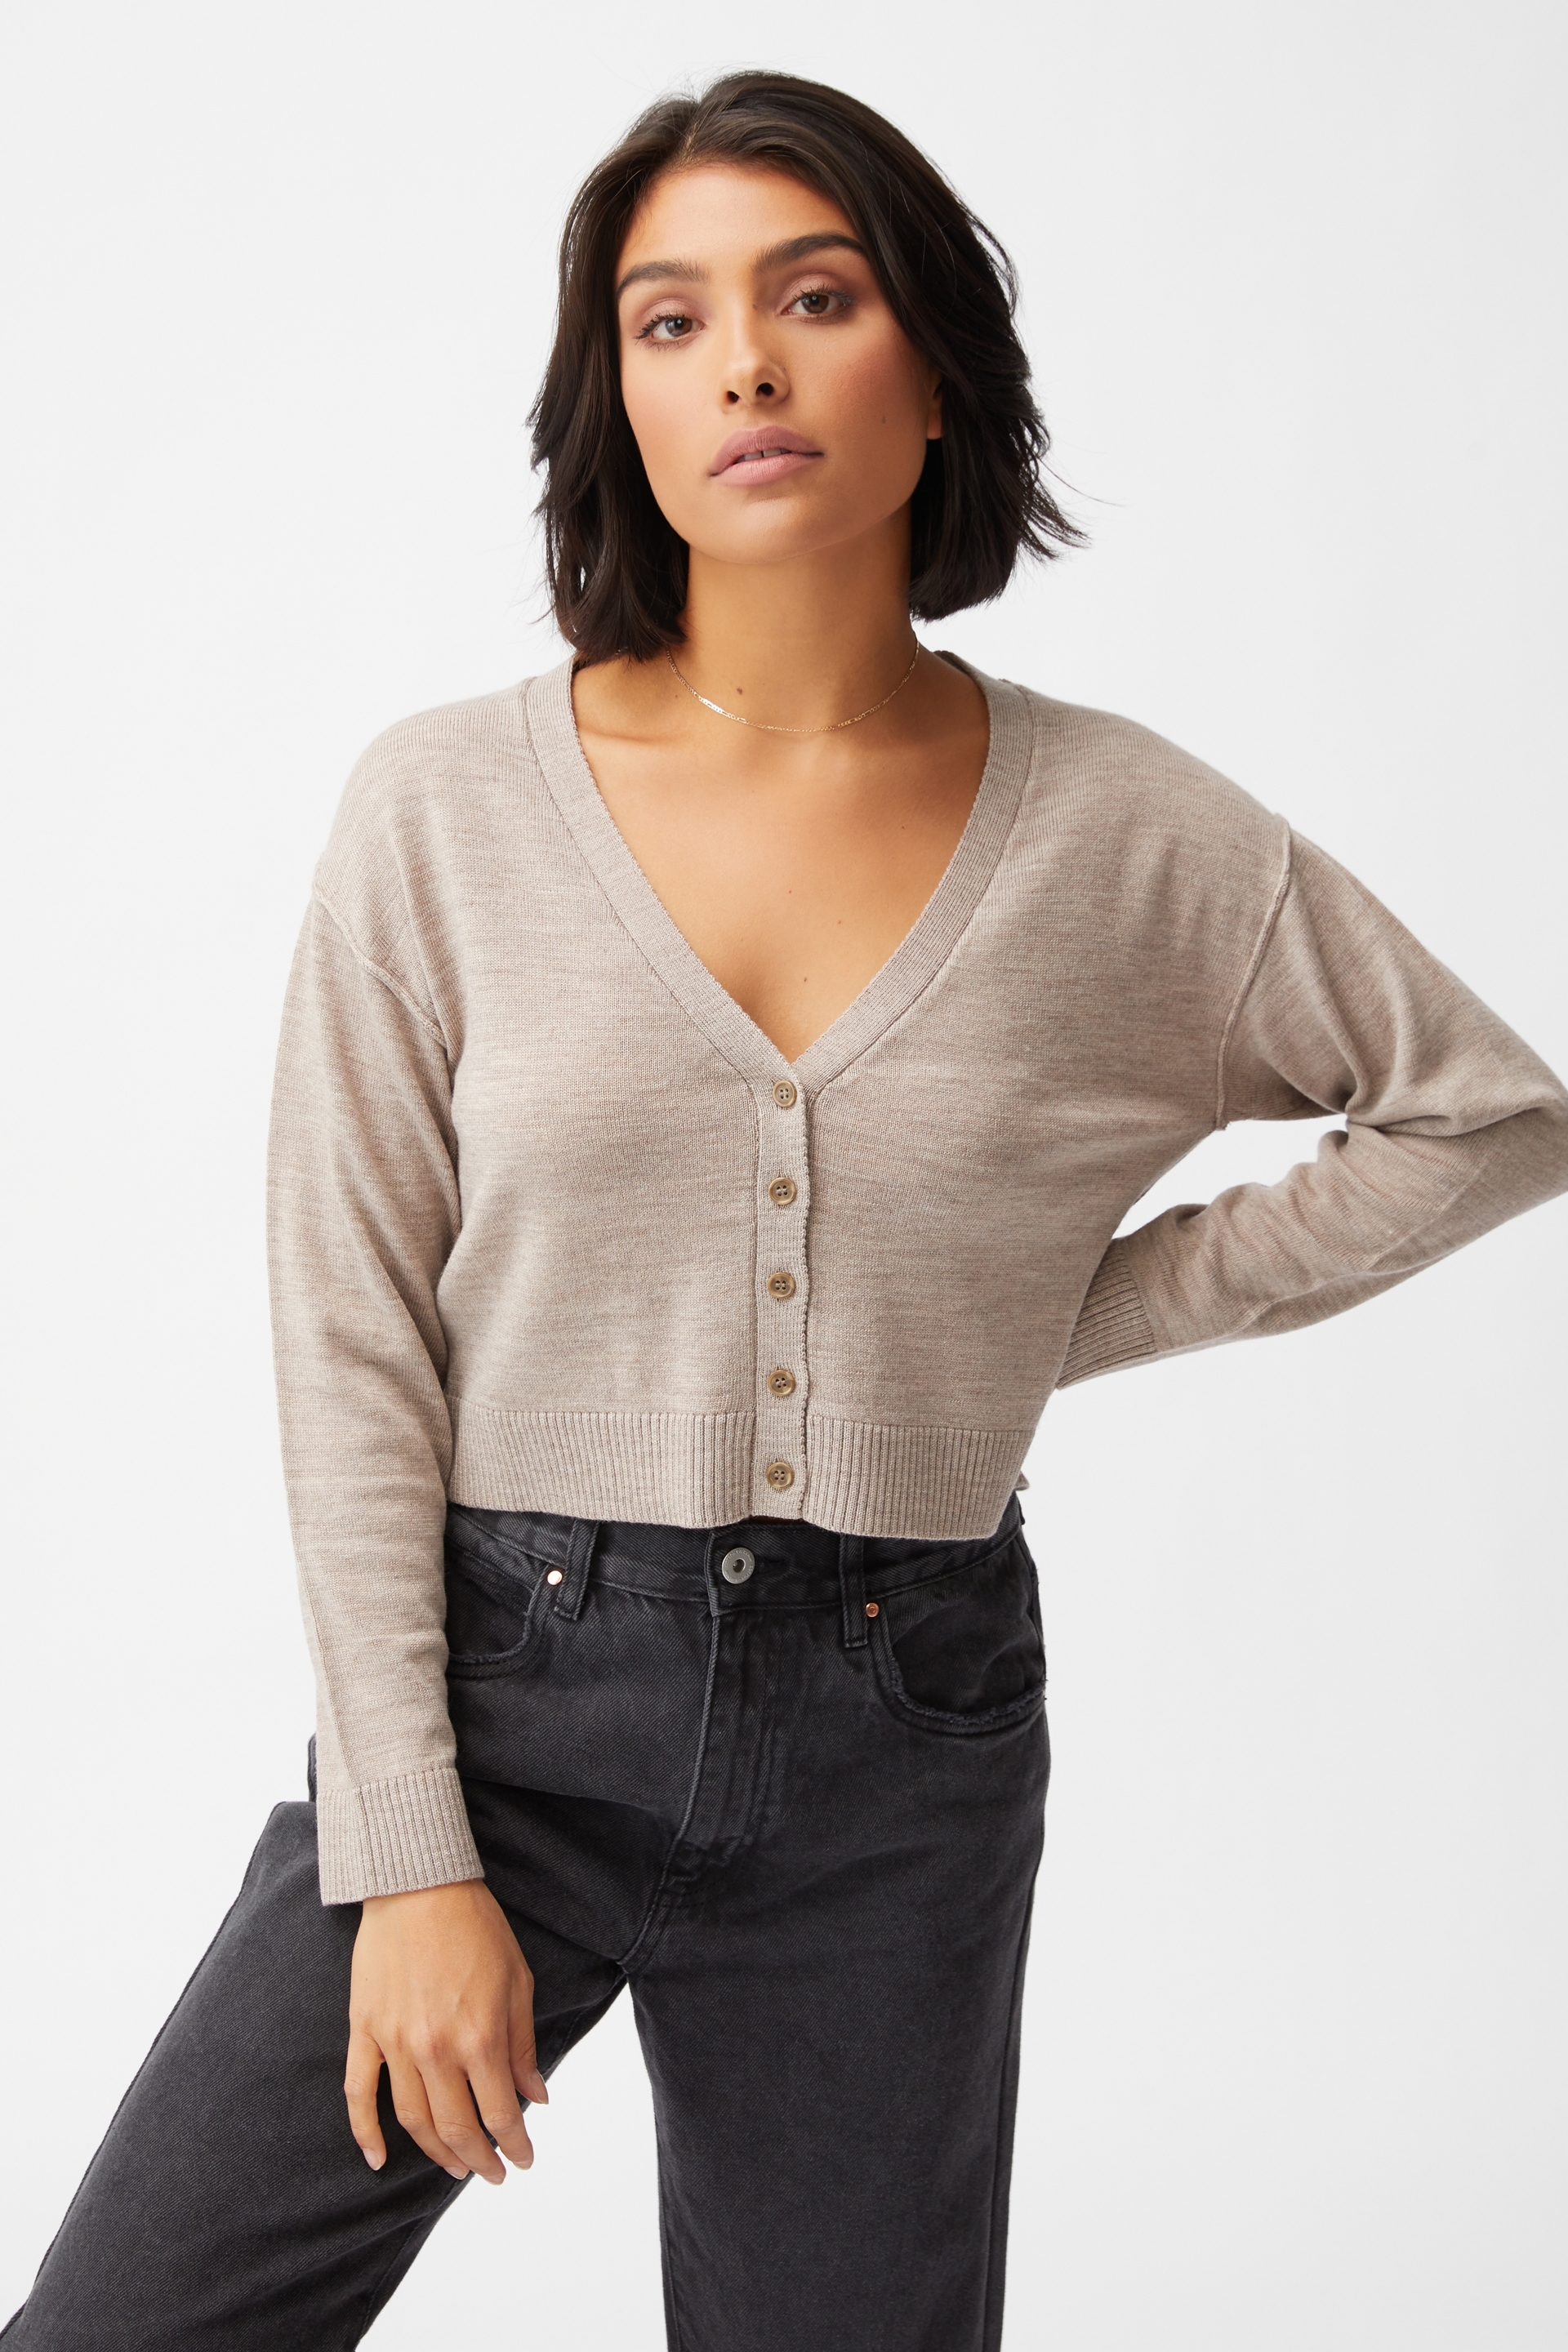 Cotton On Women - Wool Cropped Cardigan - Taupe marle